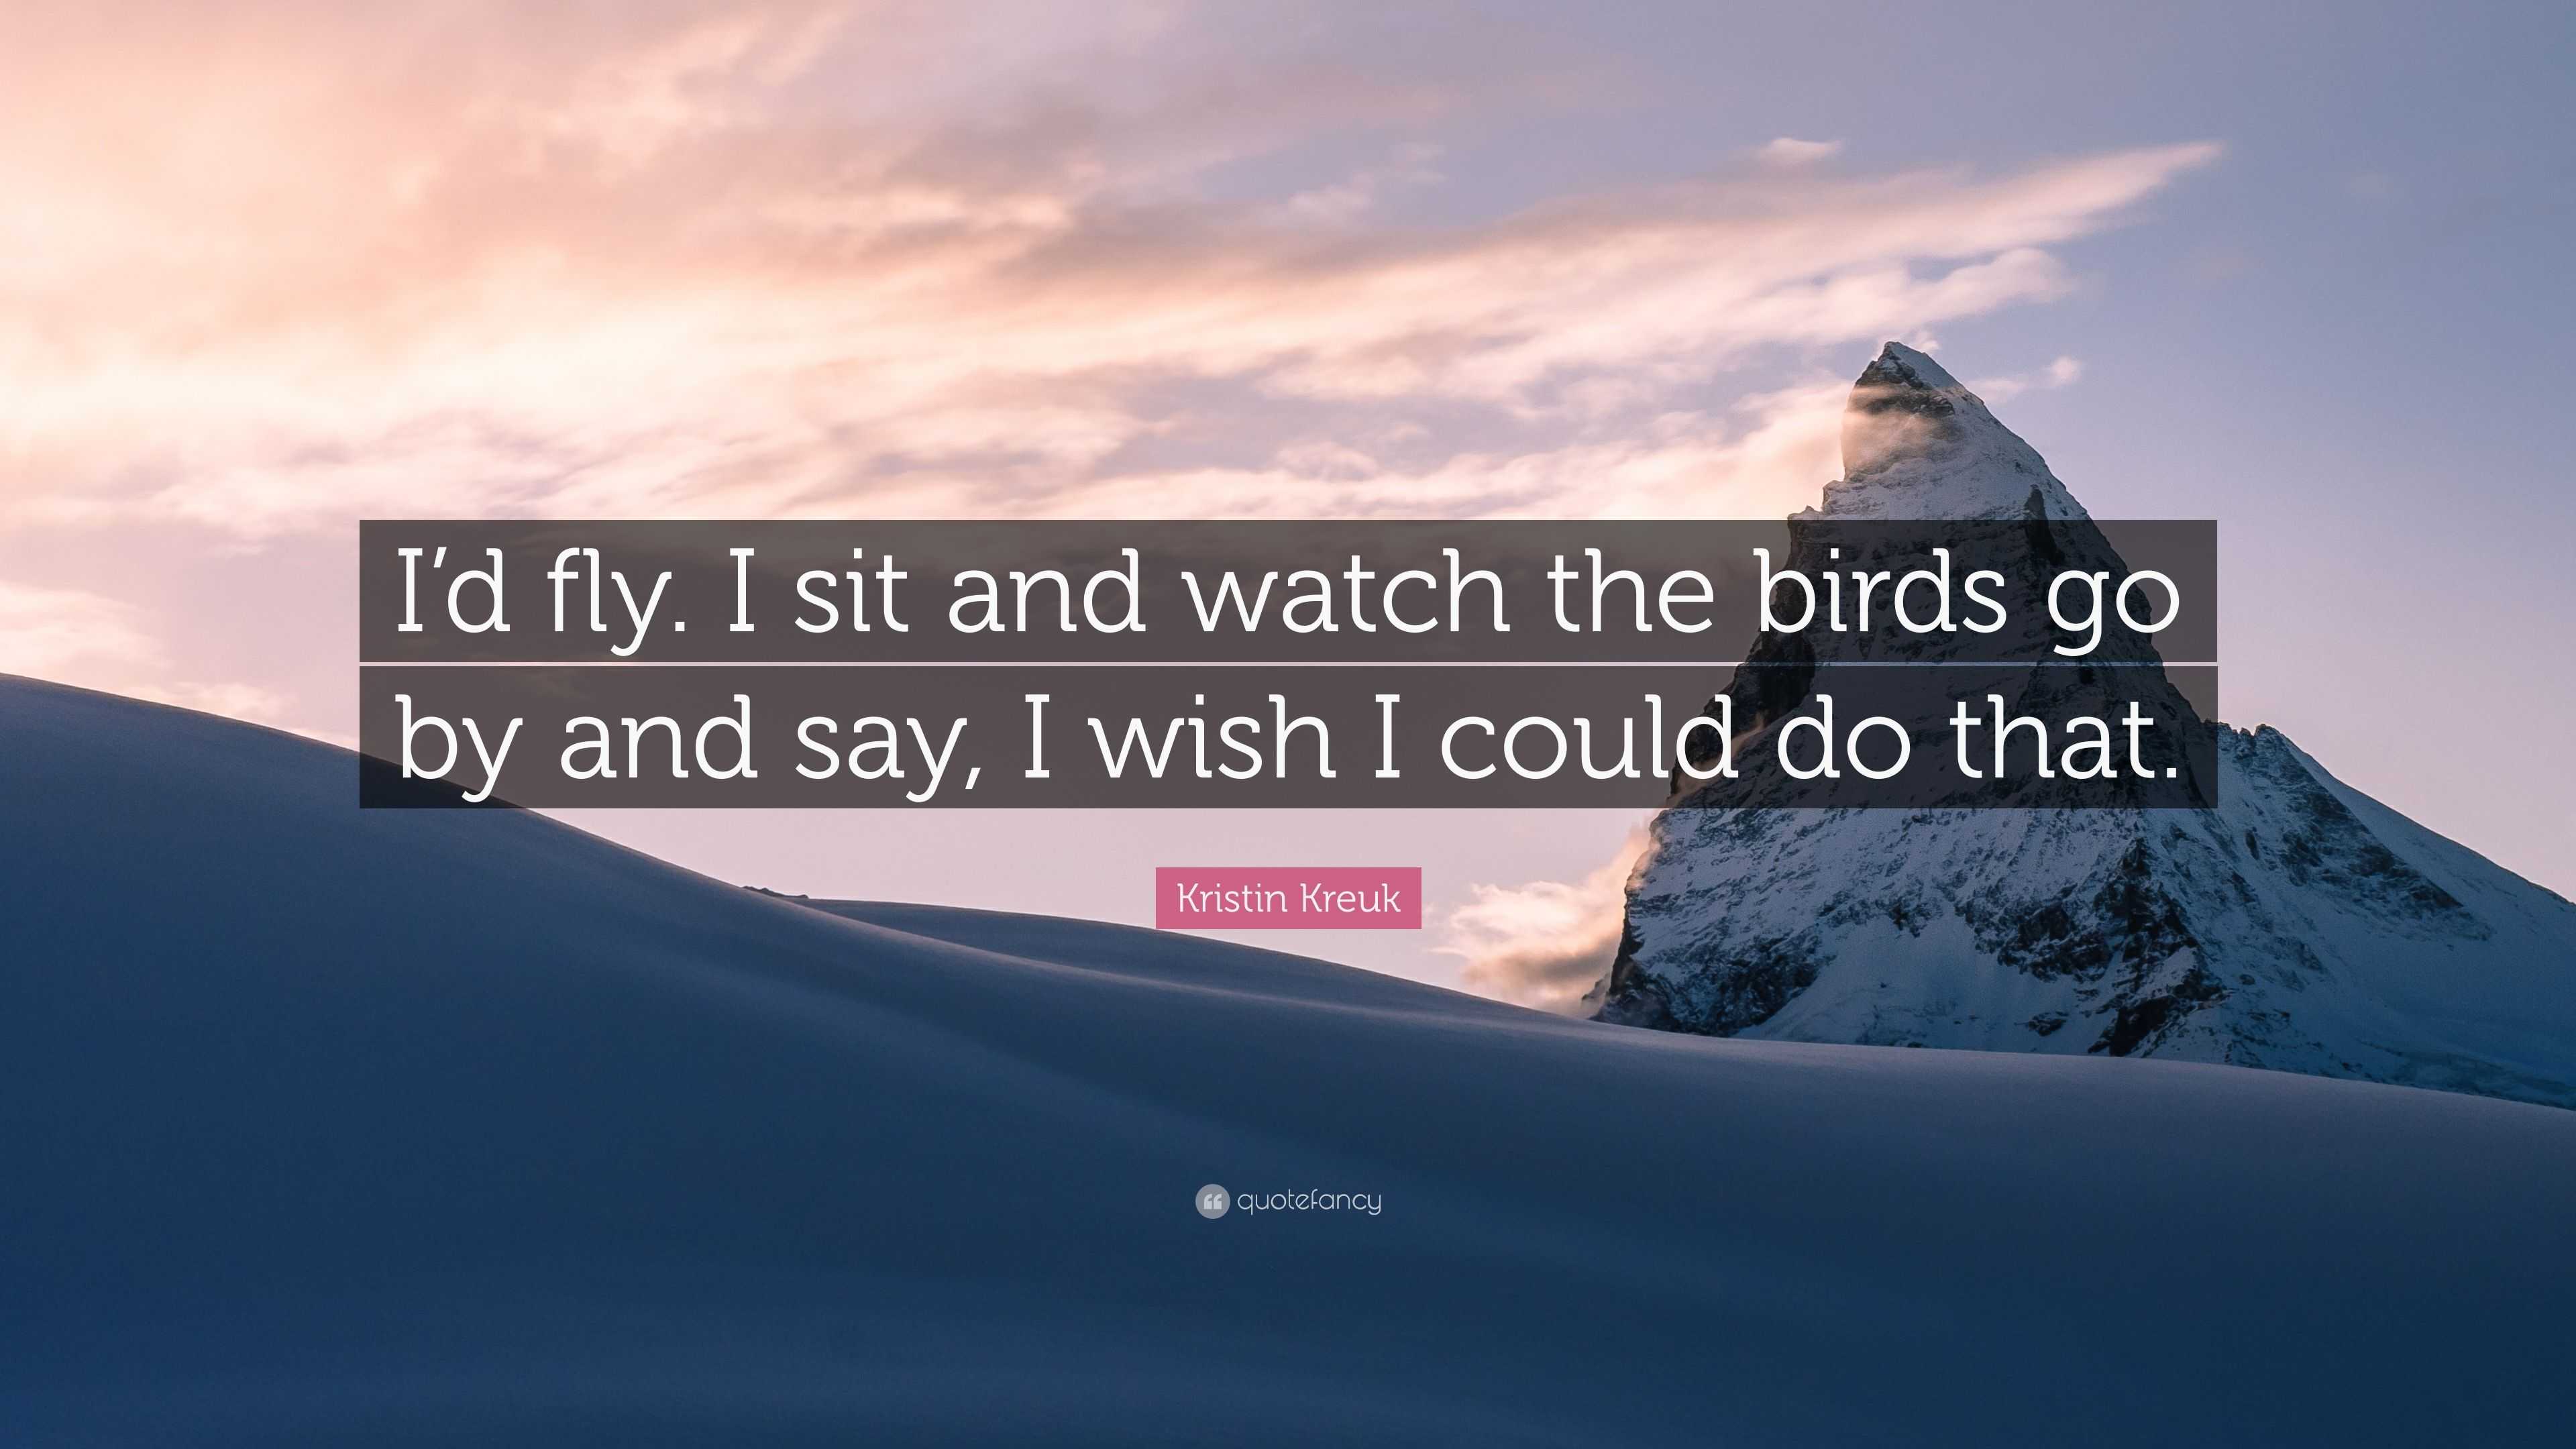 Kristin Kreuk Quote: “I’d fly. I sit and watch the birds go by and say ...